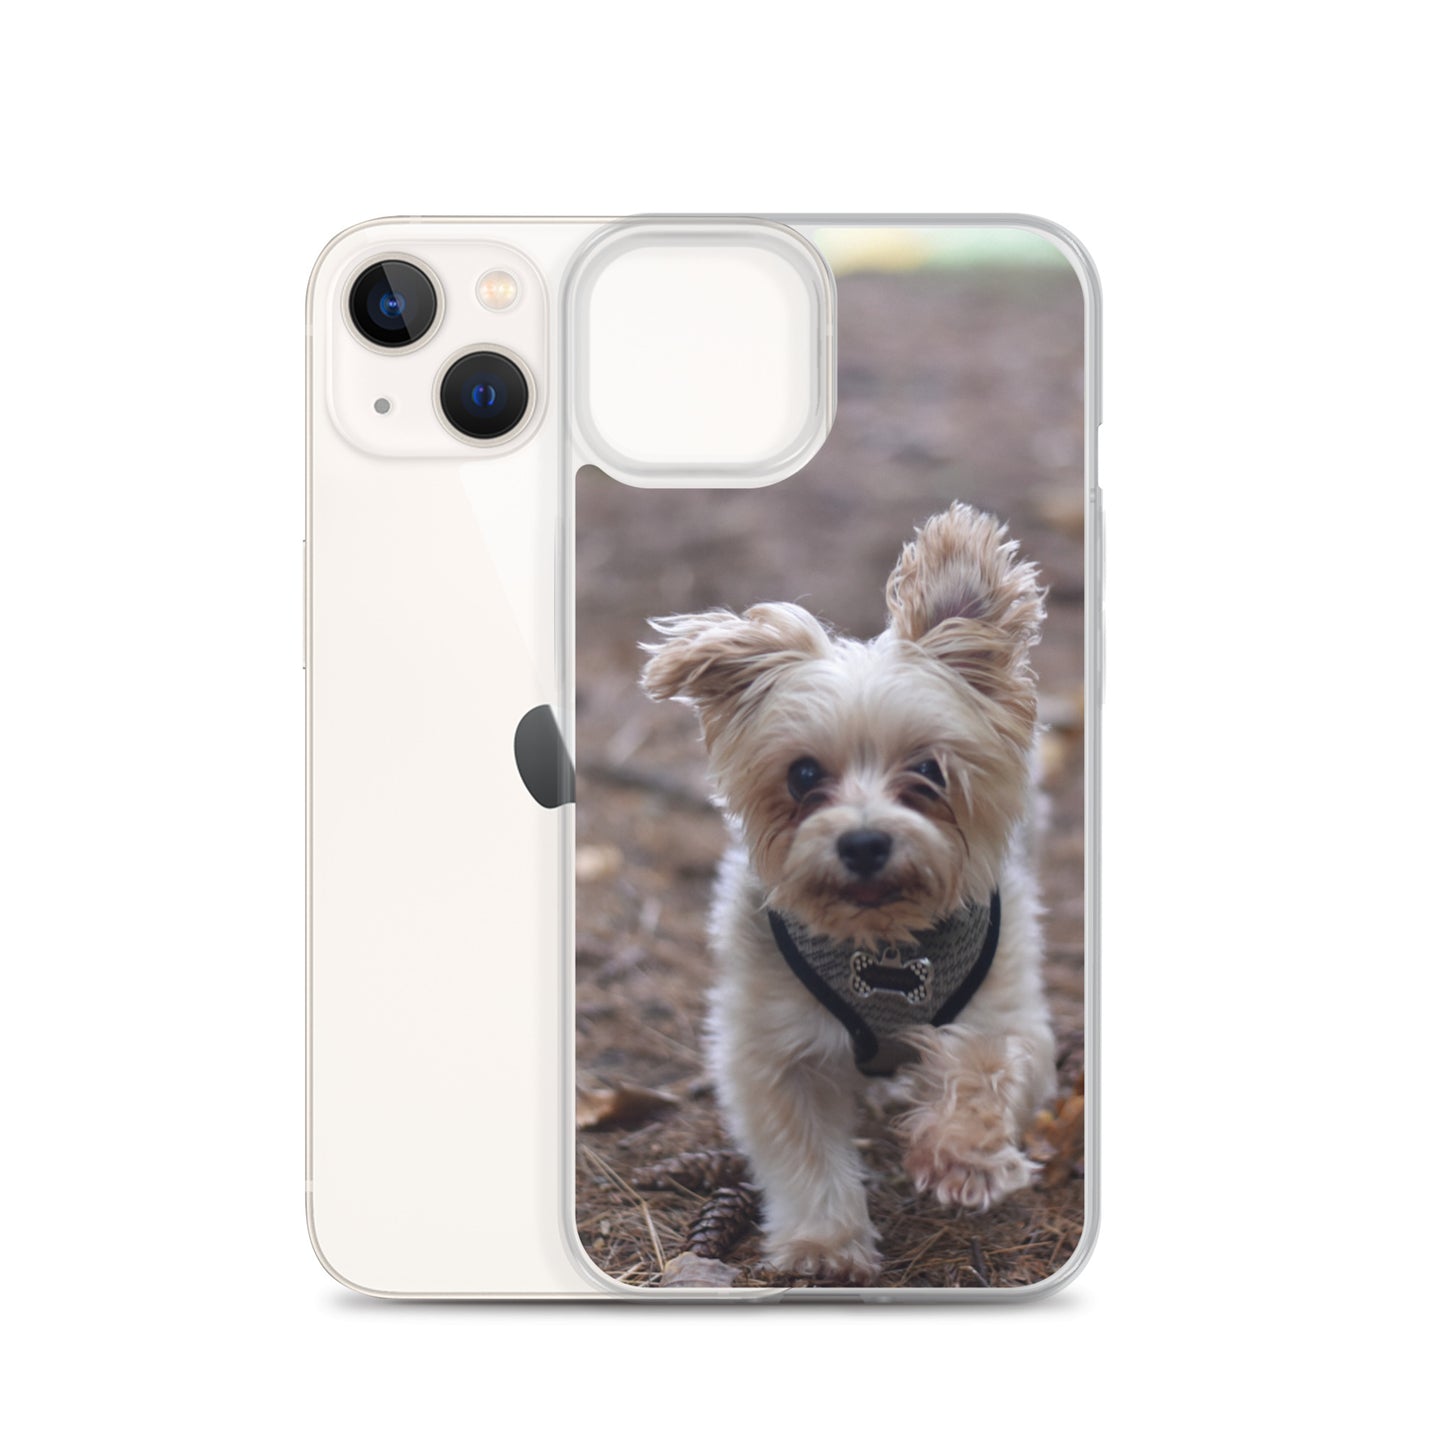 iPhone Case with Cute Hiking Pup